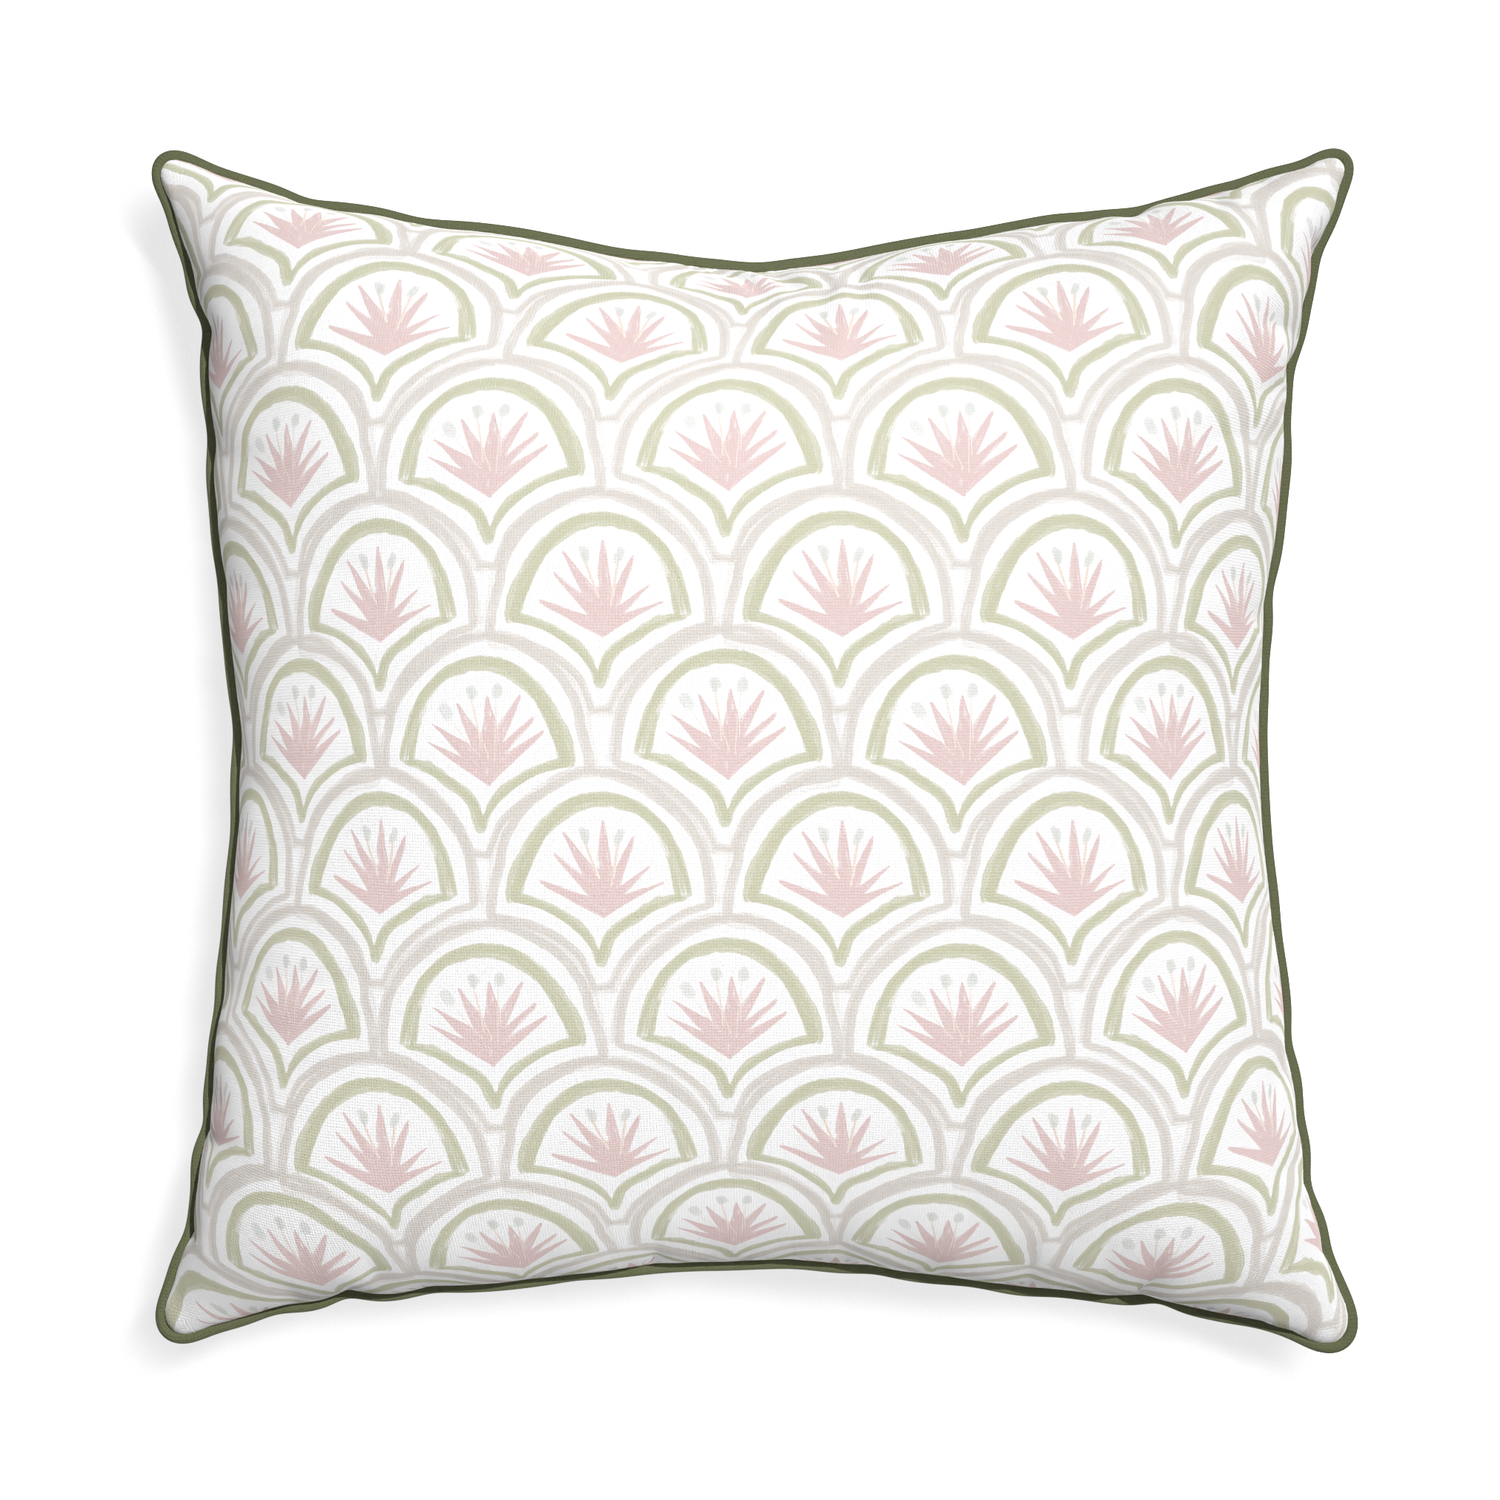 Euro-sham thatcher rose custom pink & green palmpillow with f piping on white background